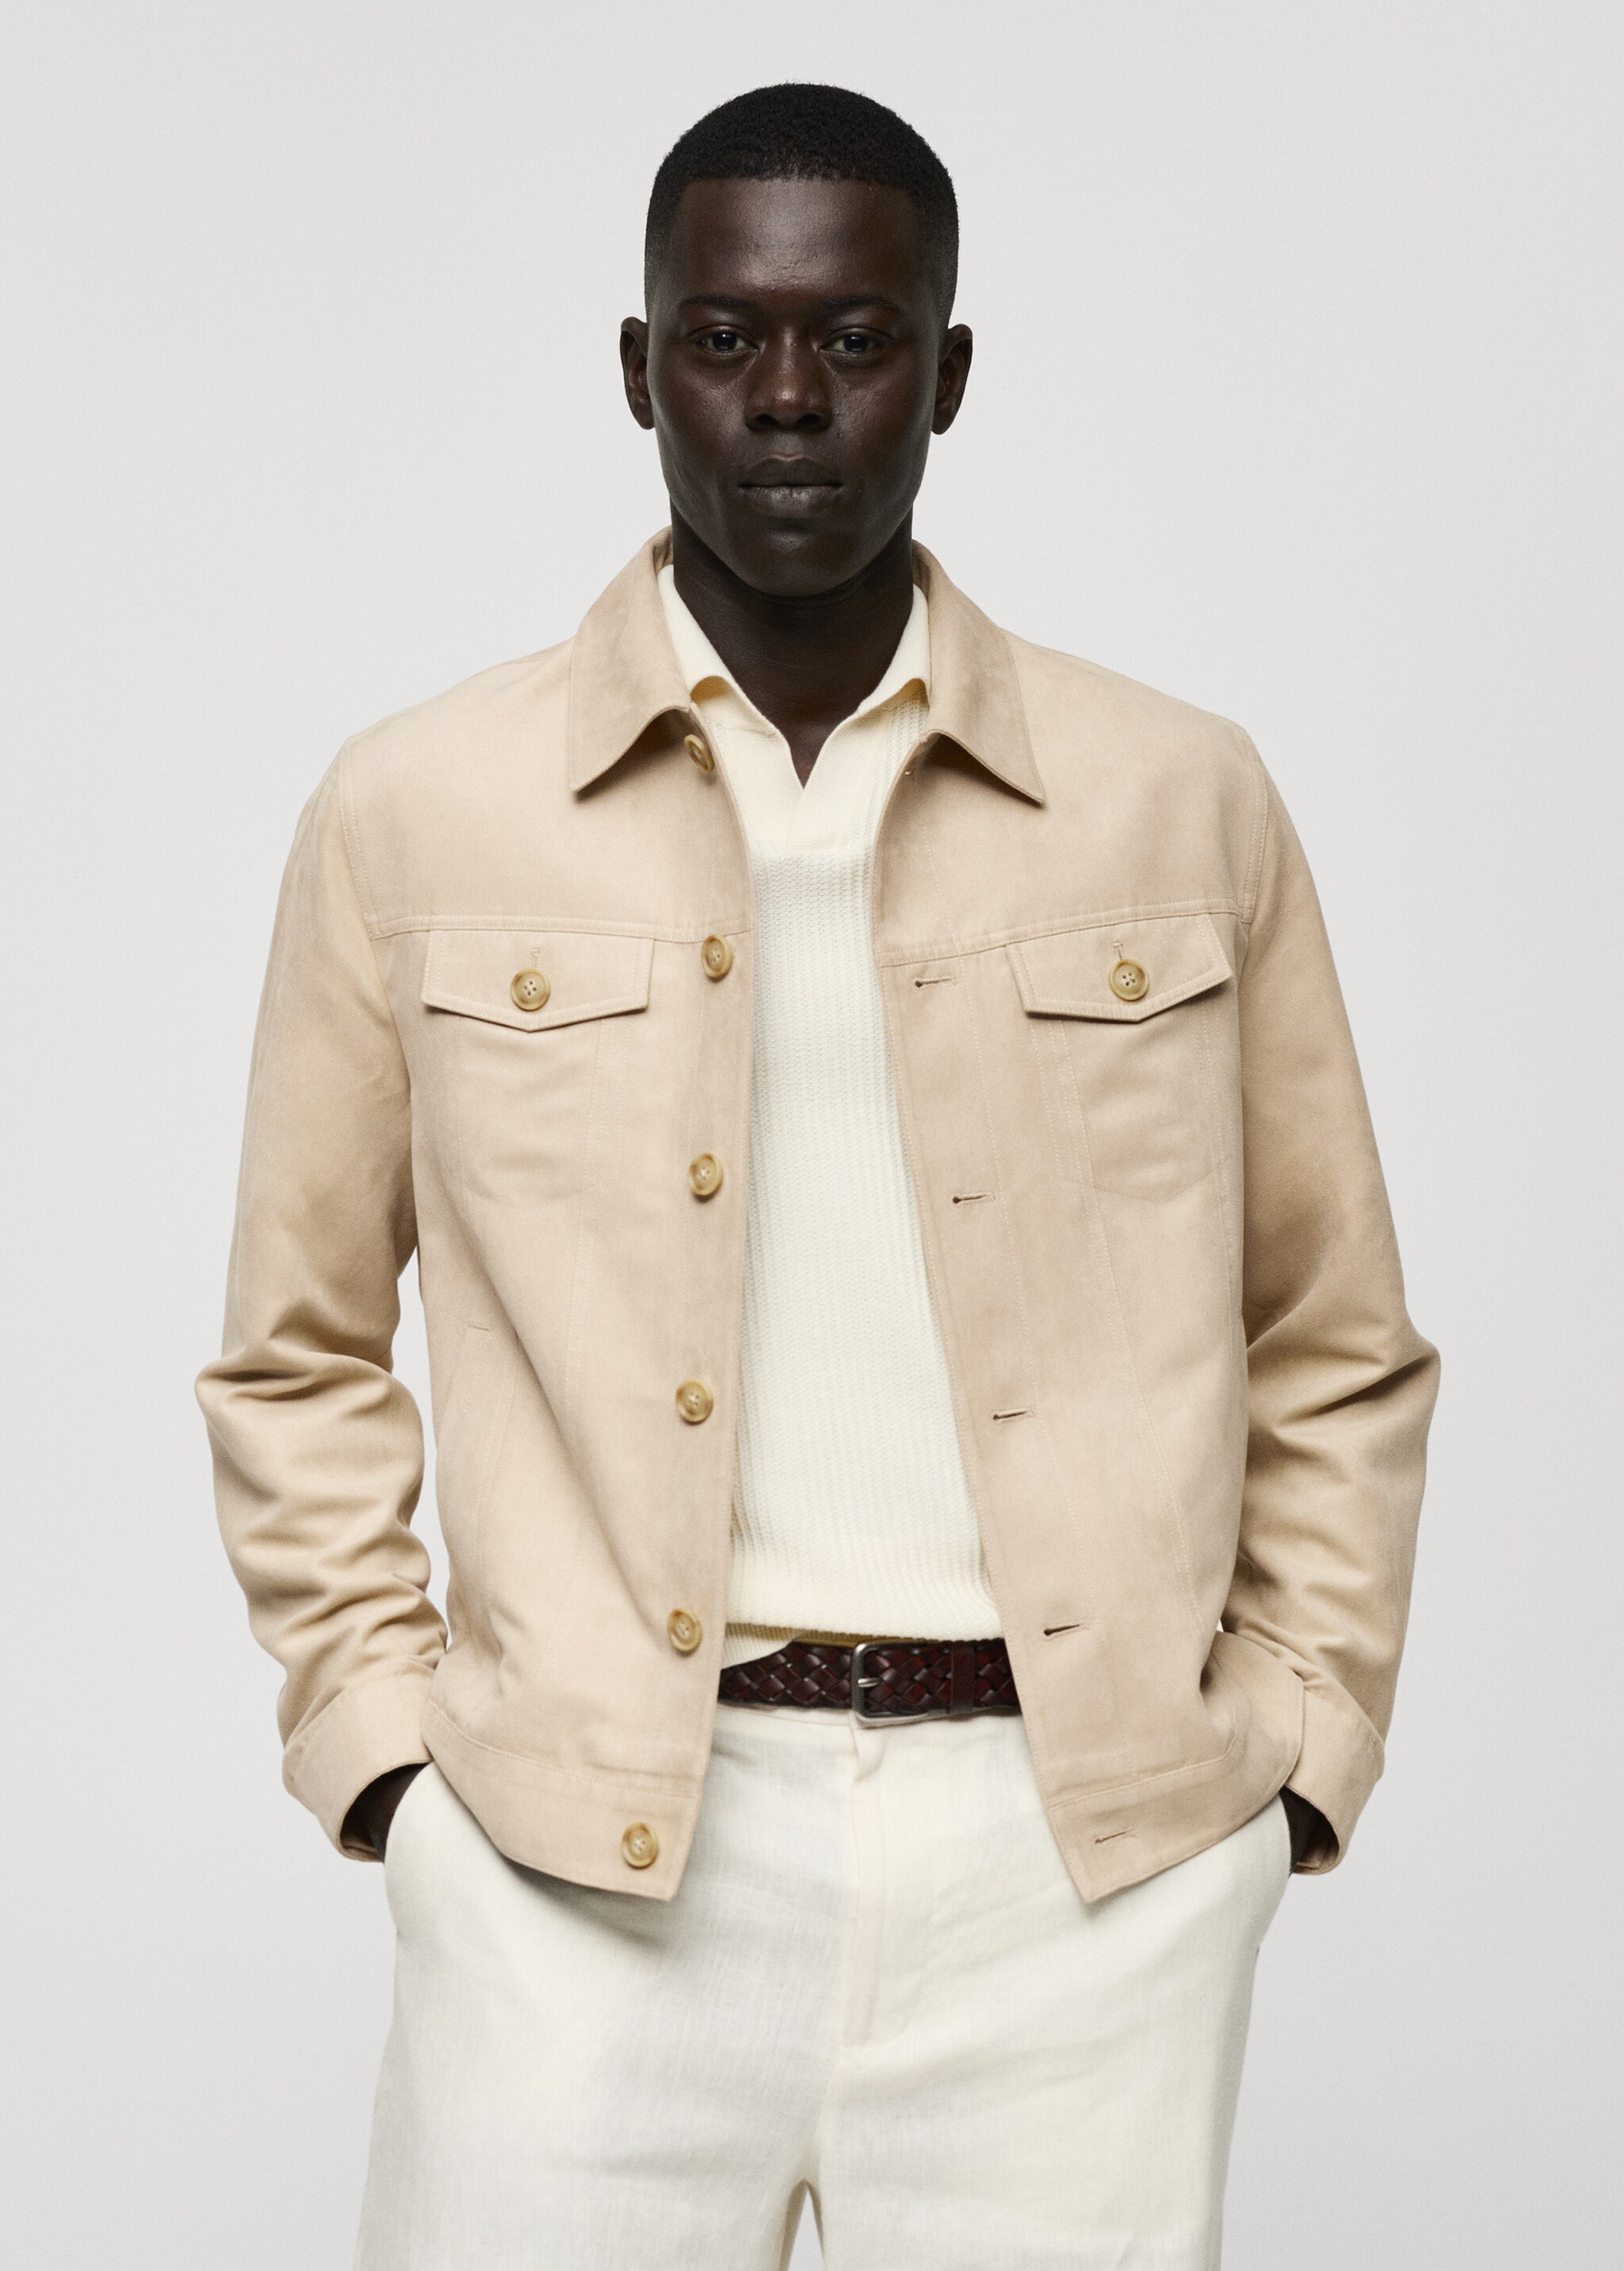 Suede effect overshirt with pockets - Medium plane